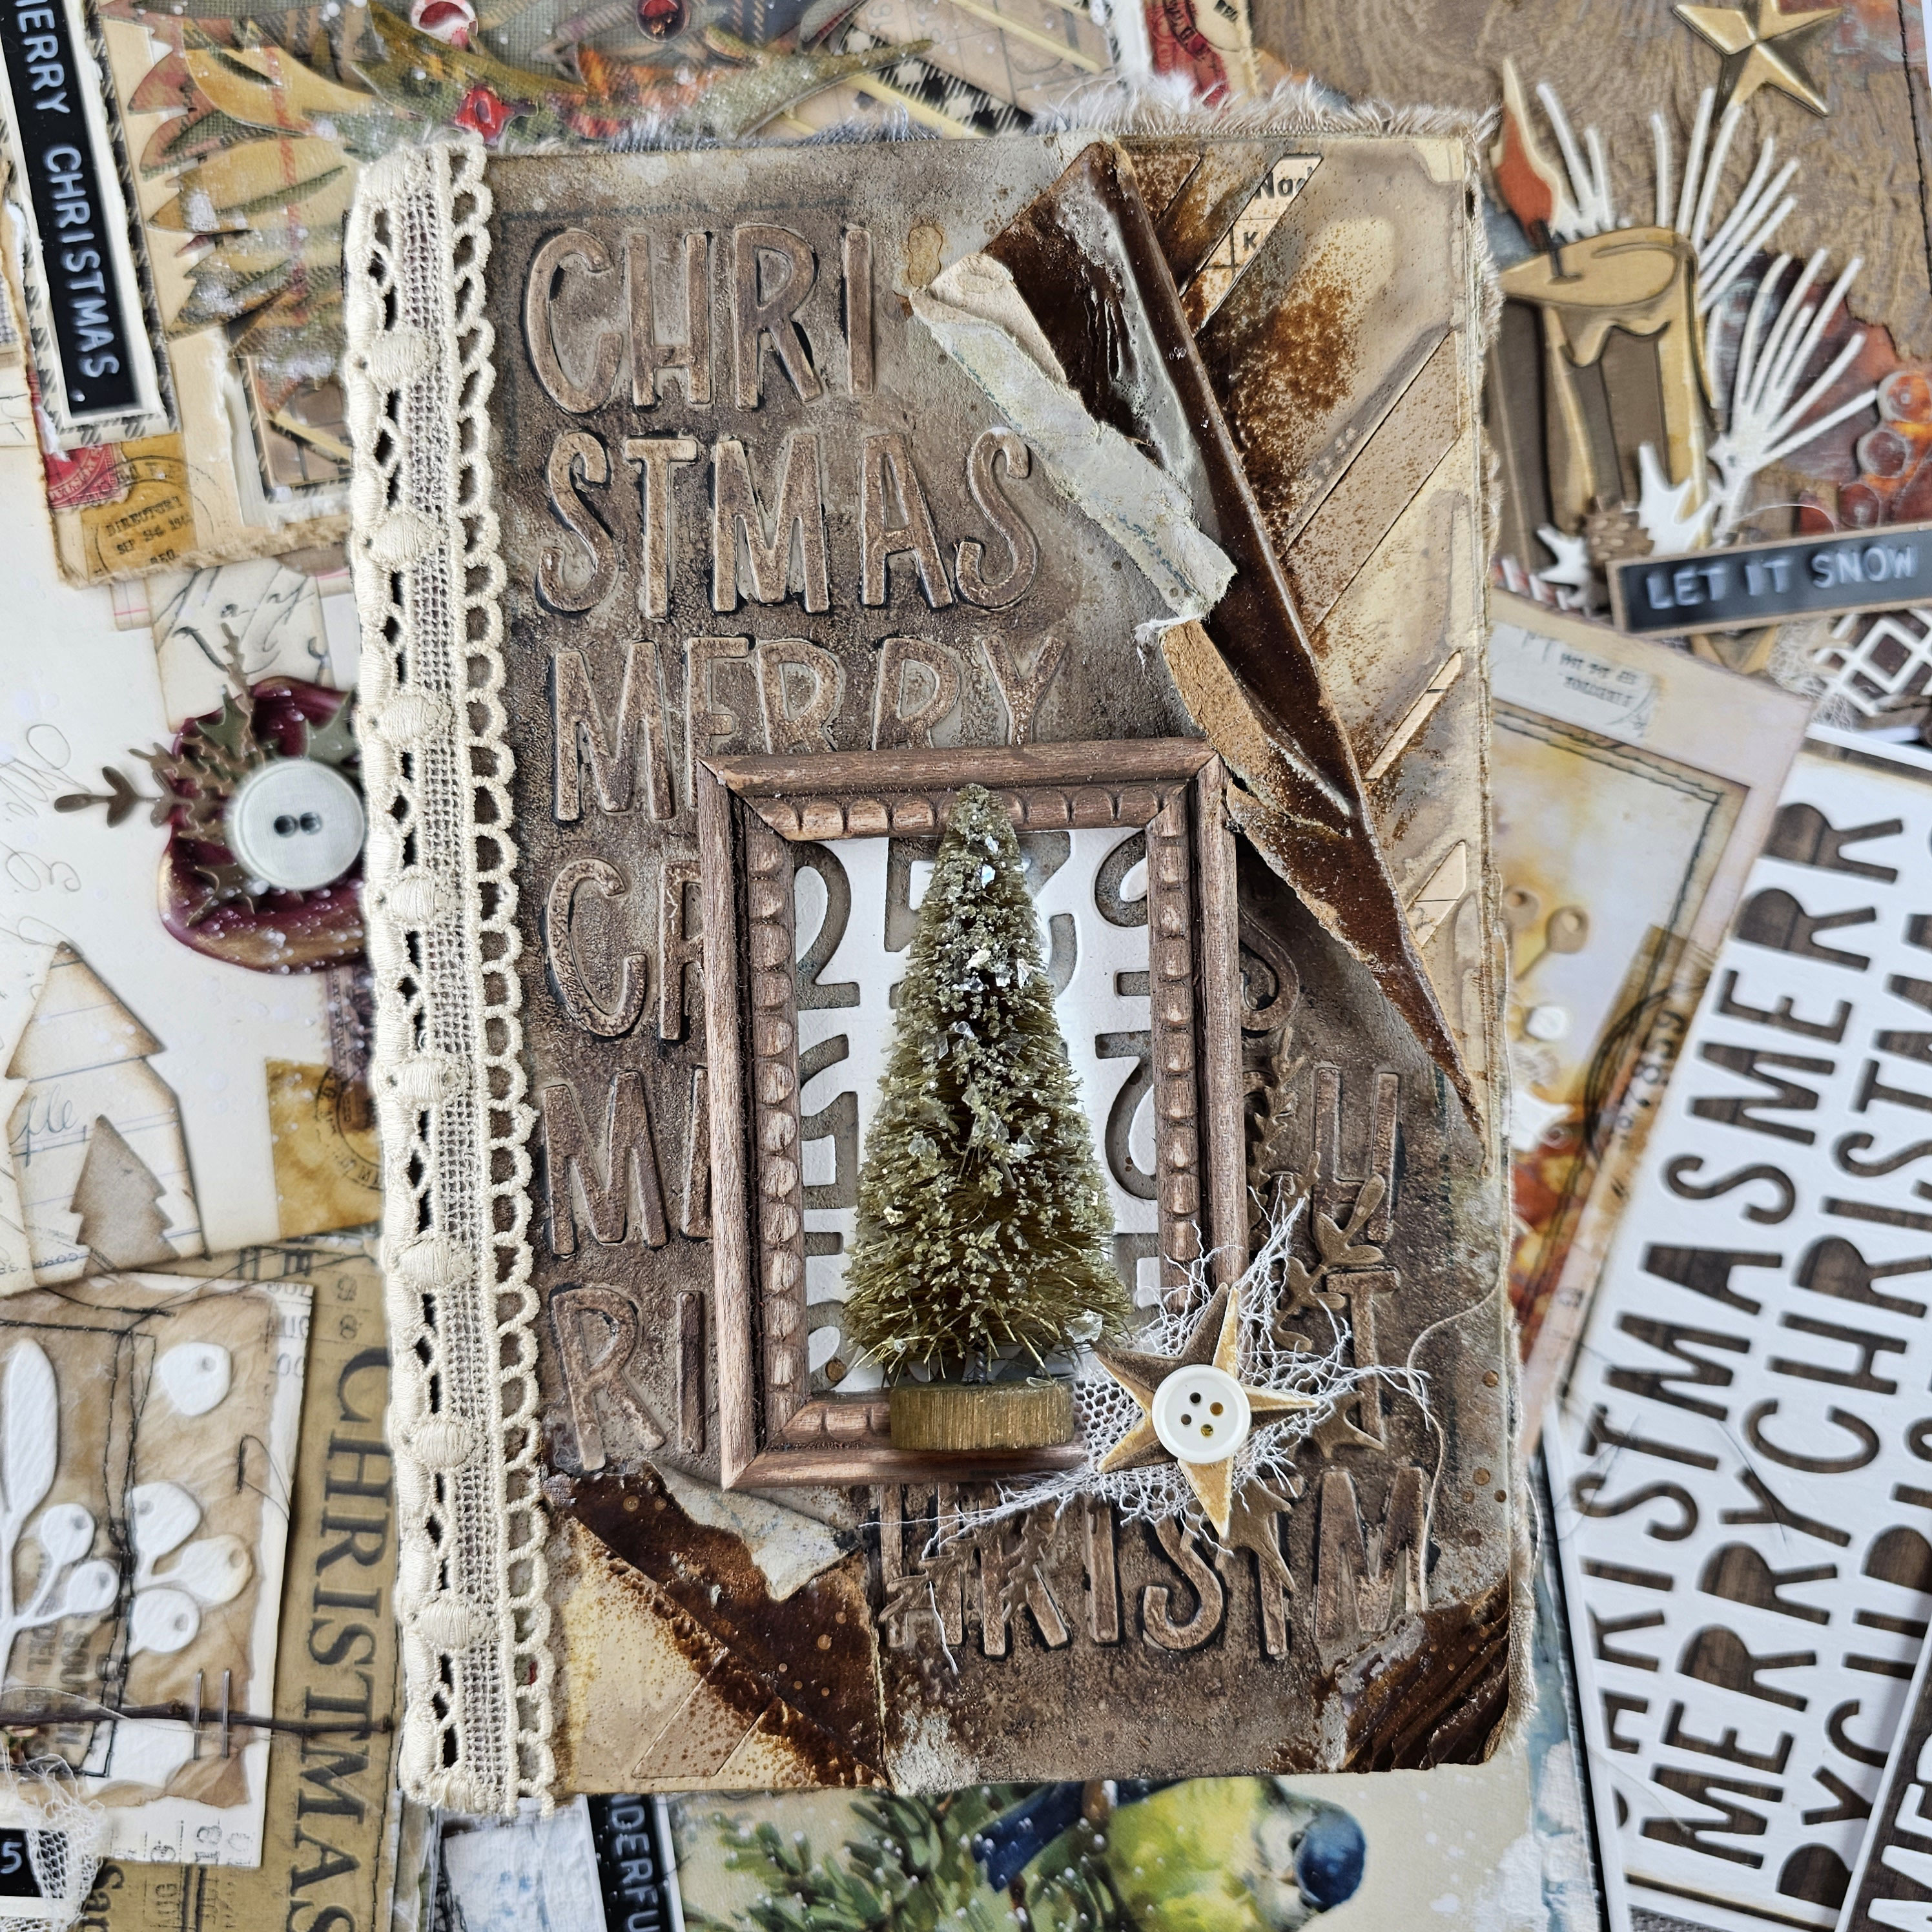 Tim Holtz Christmas Holiday 2023 Sizzix Release!